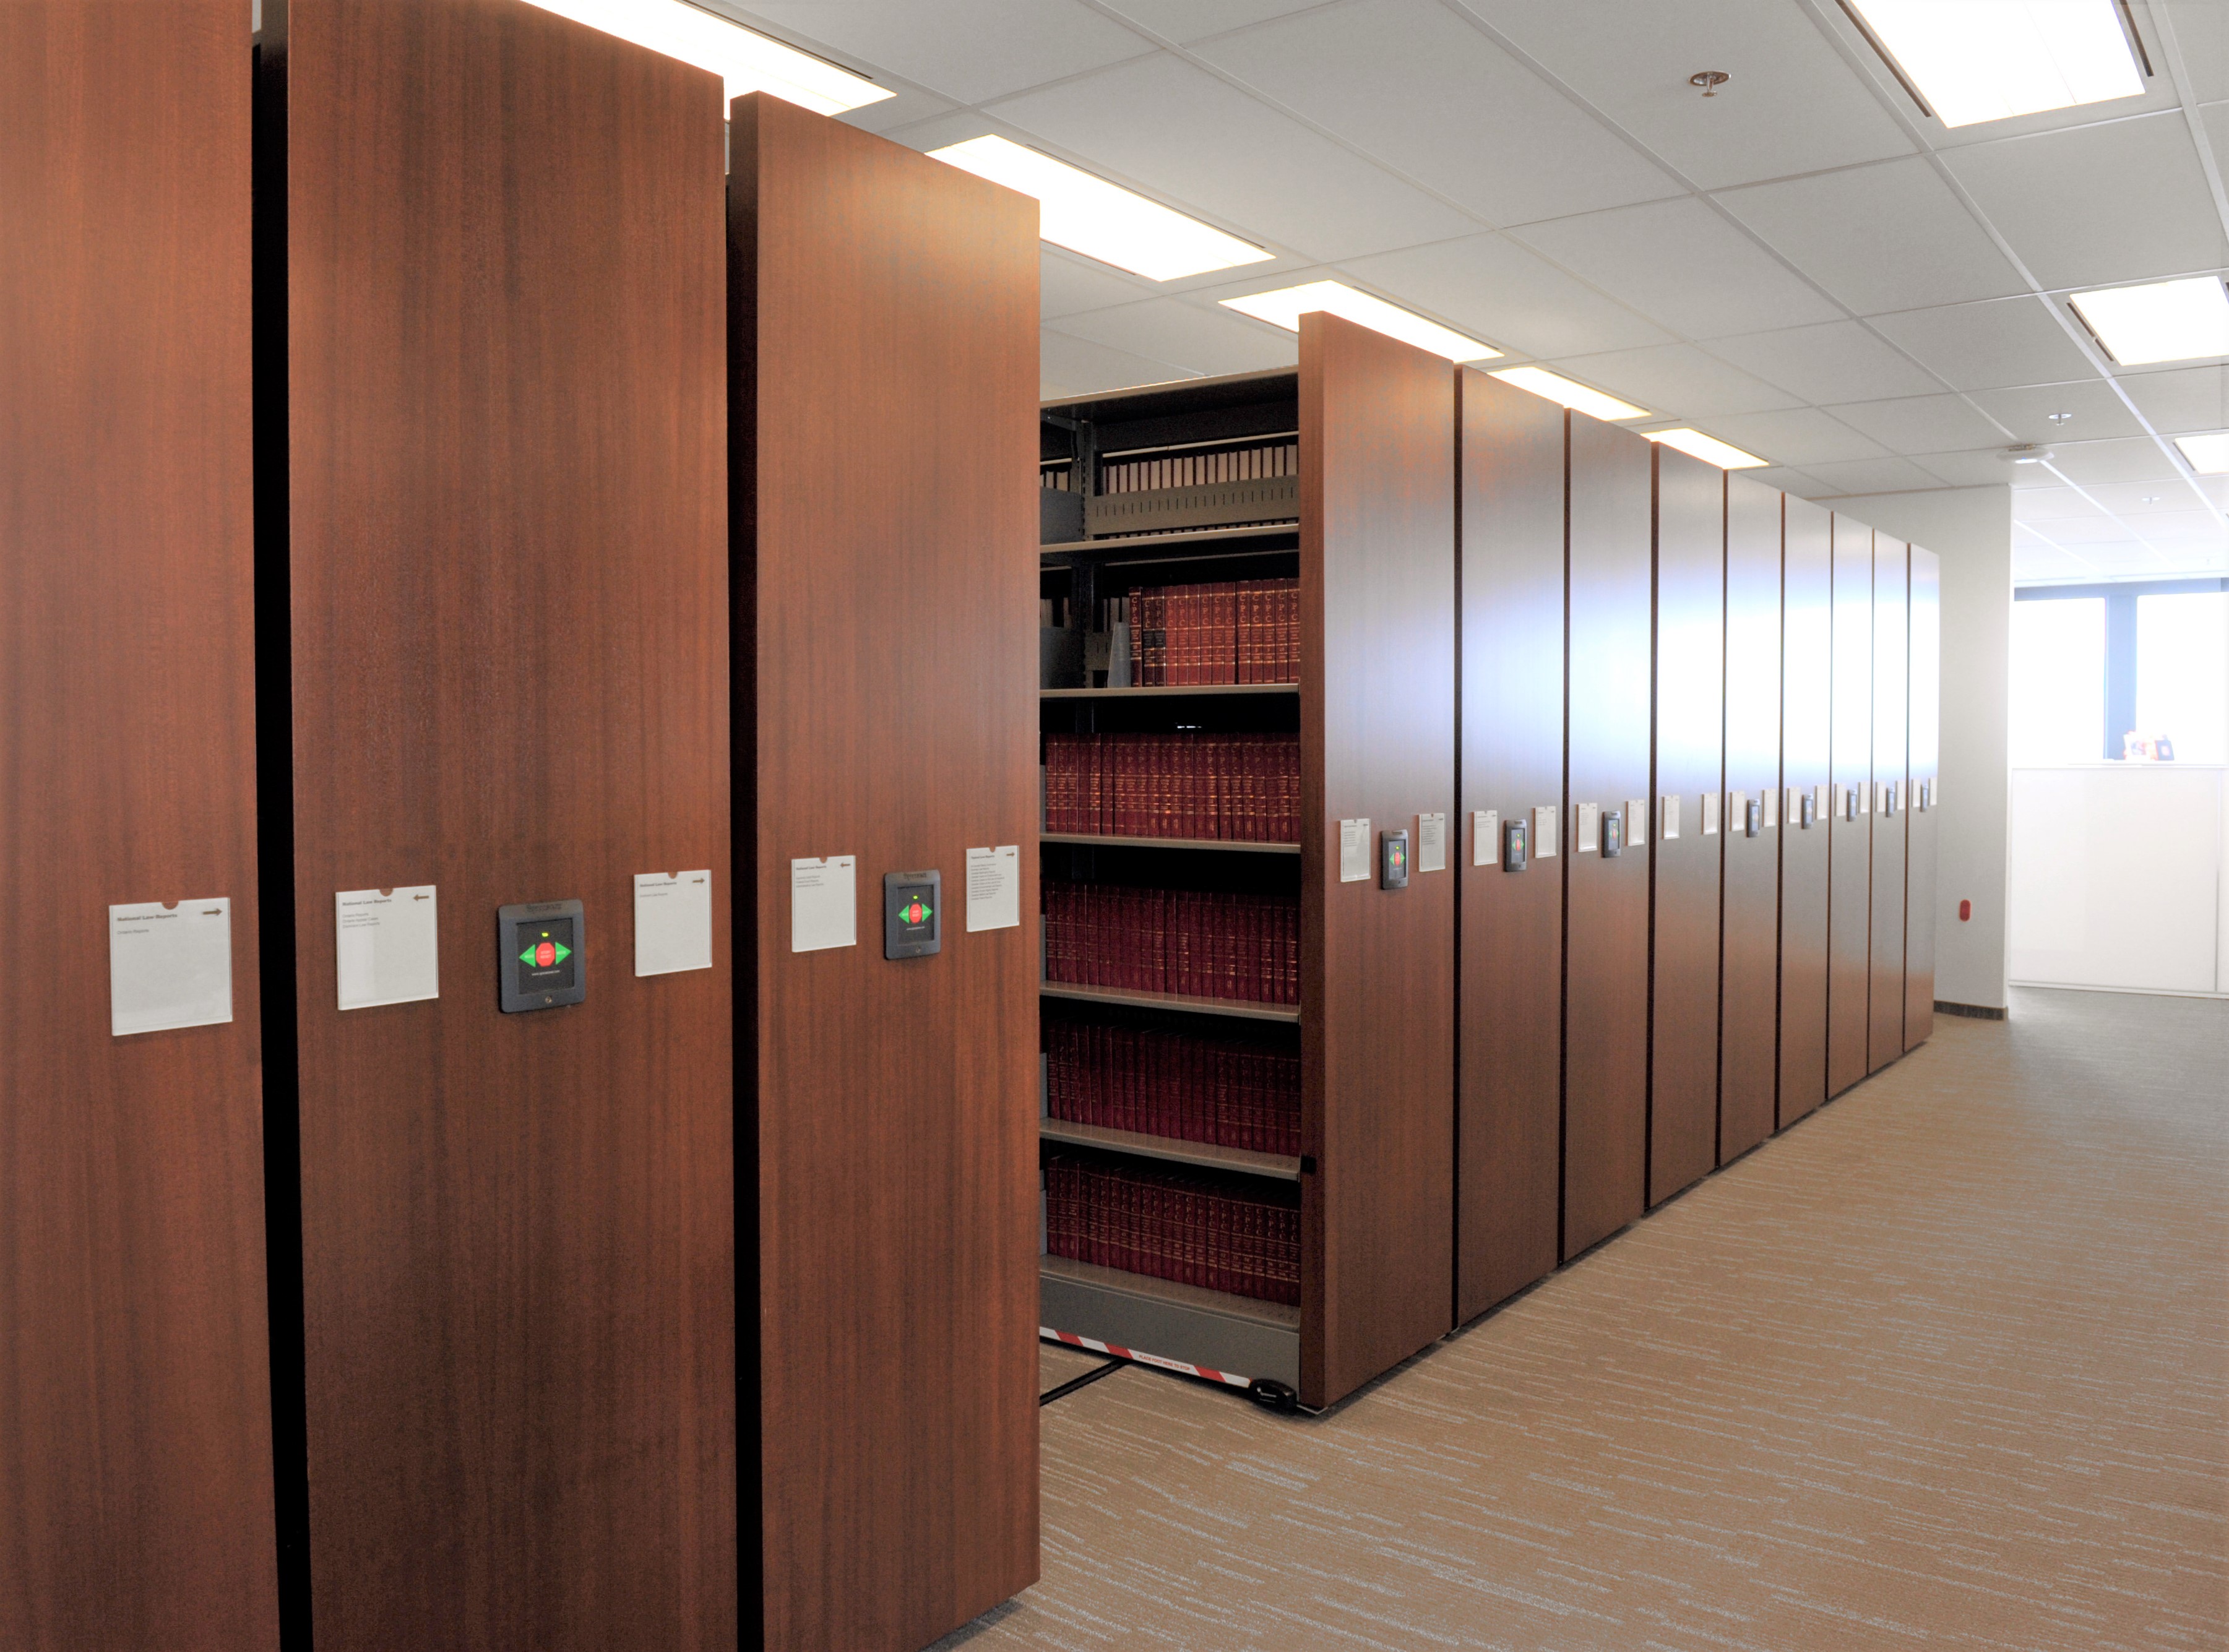 Spacesaver High-Density Mobile Shelving in a Law Library